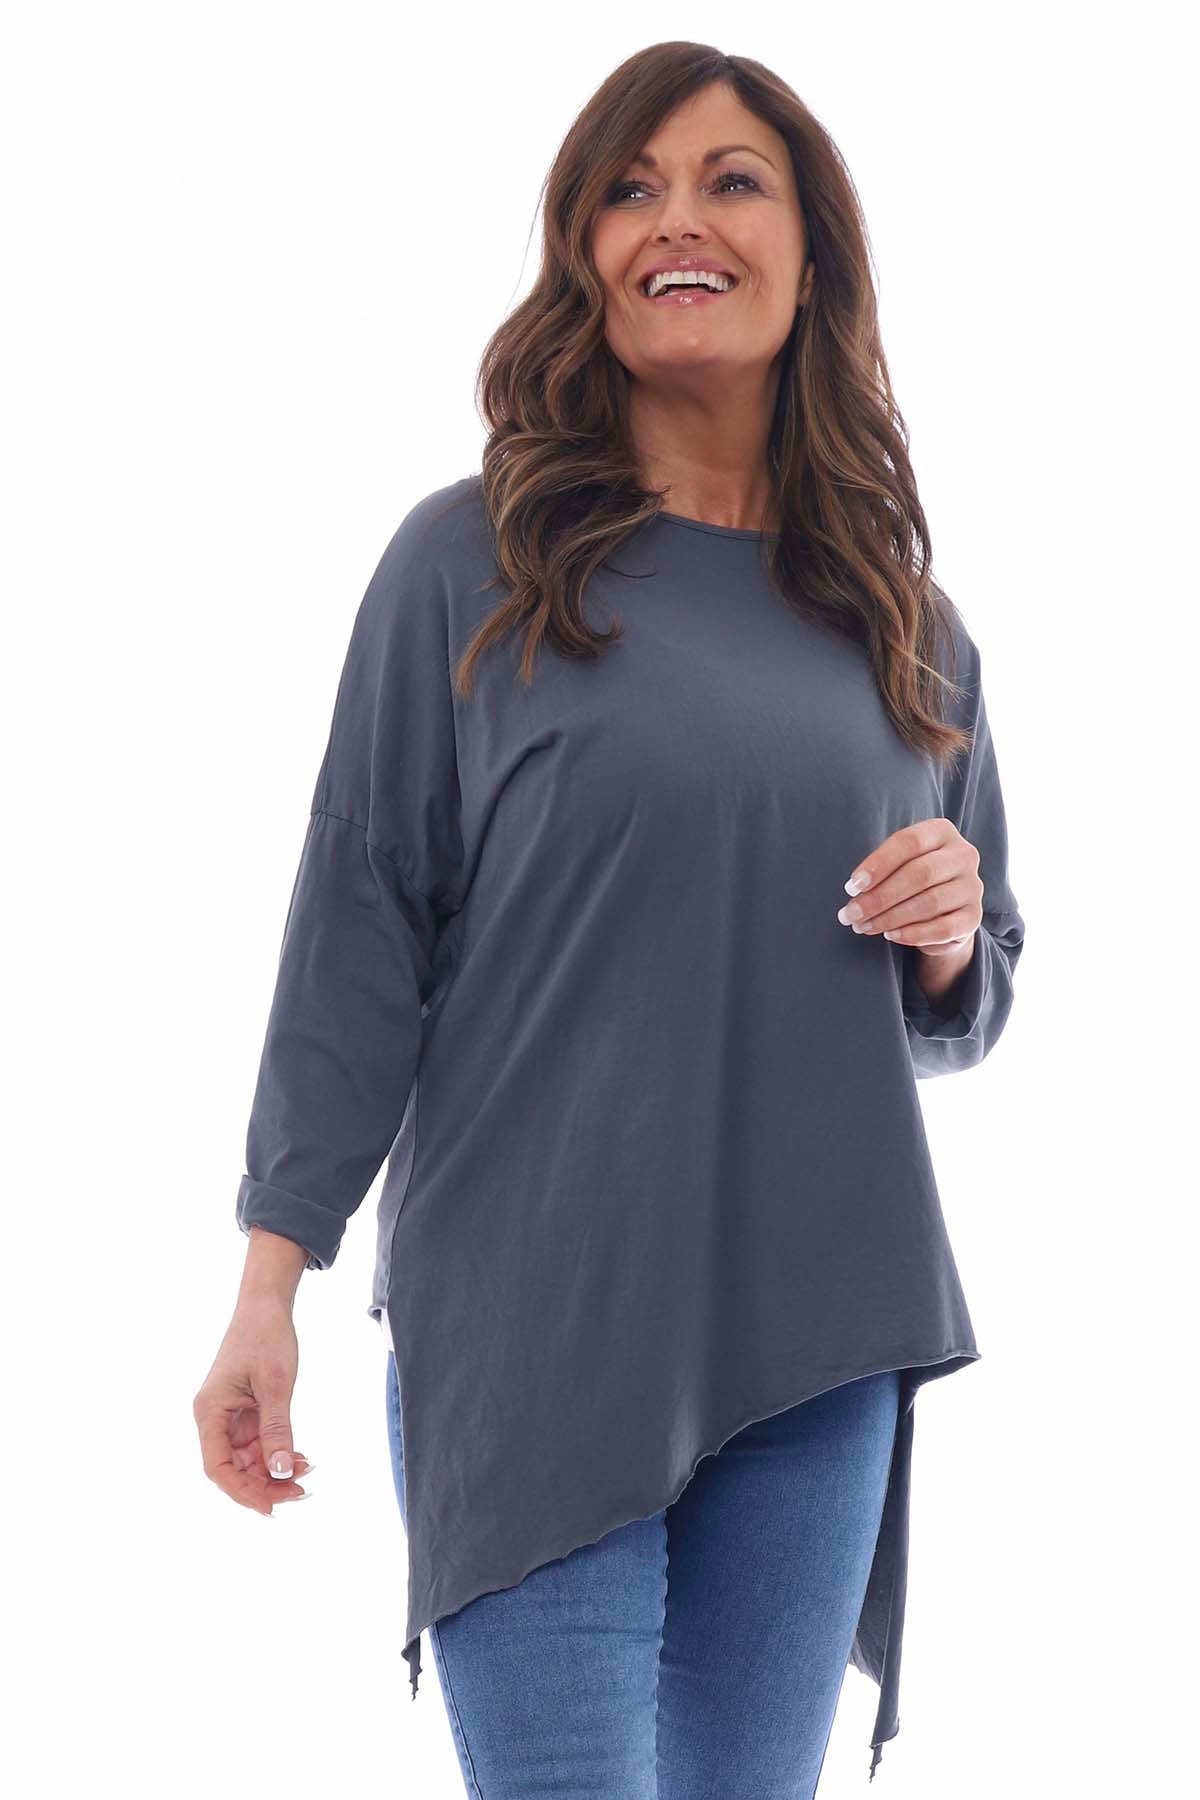 Sibil Cotton Dip Side Top Charcoal